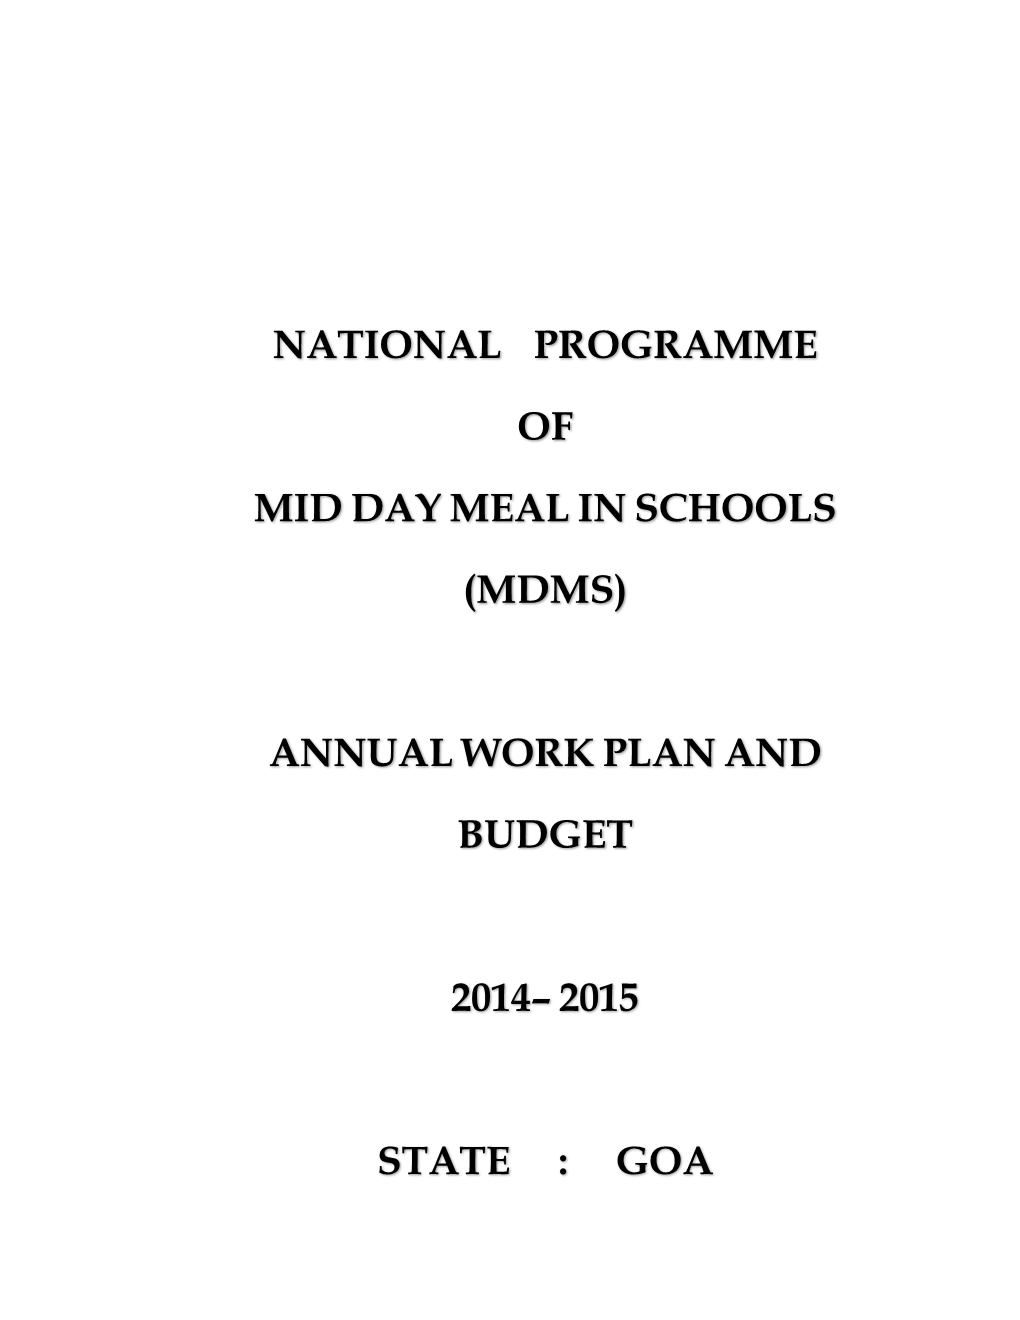 National Programme of Mid Day Meal in Schools